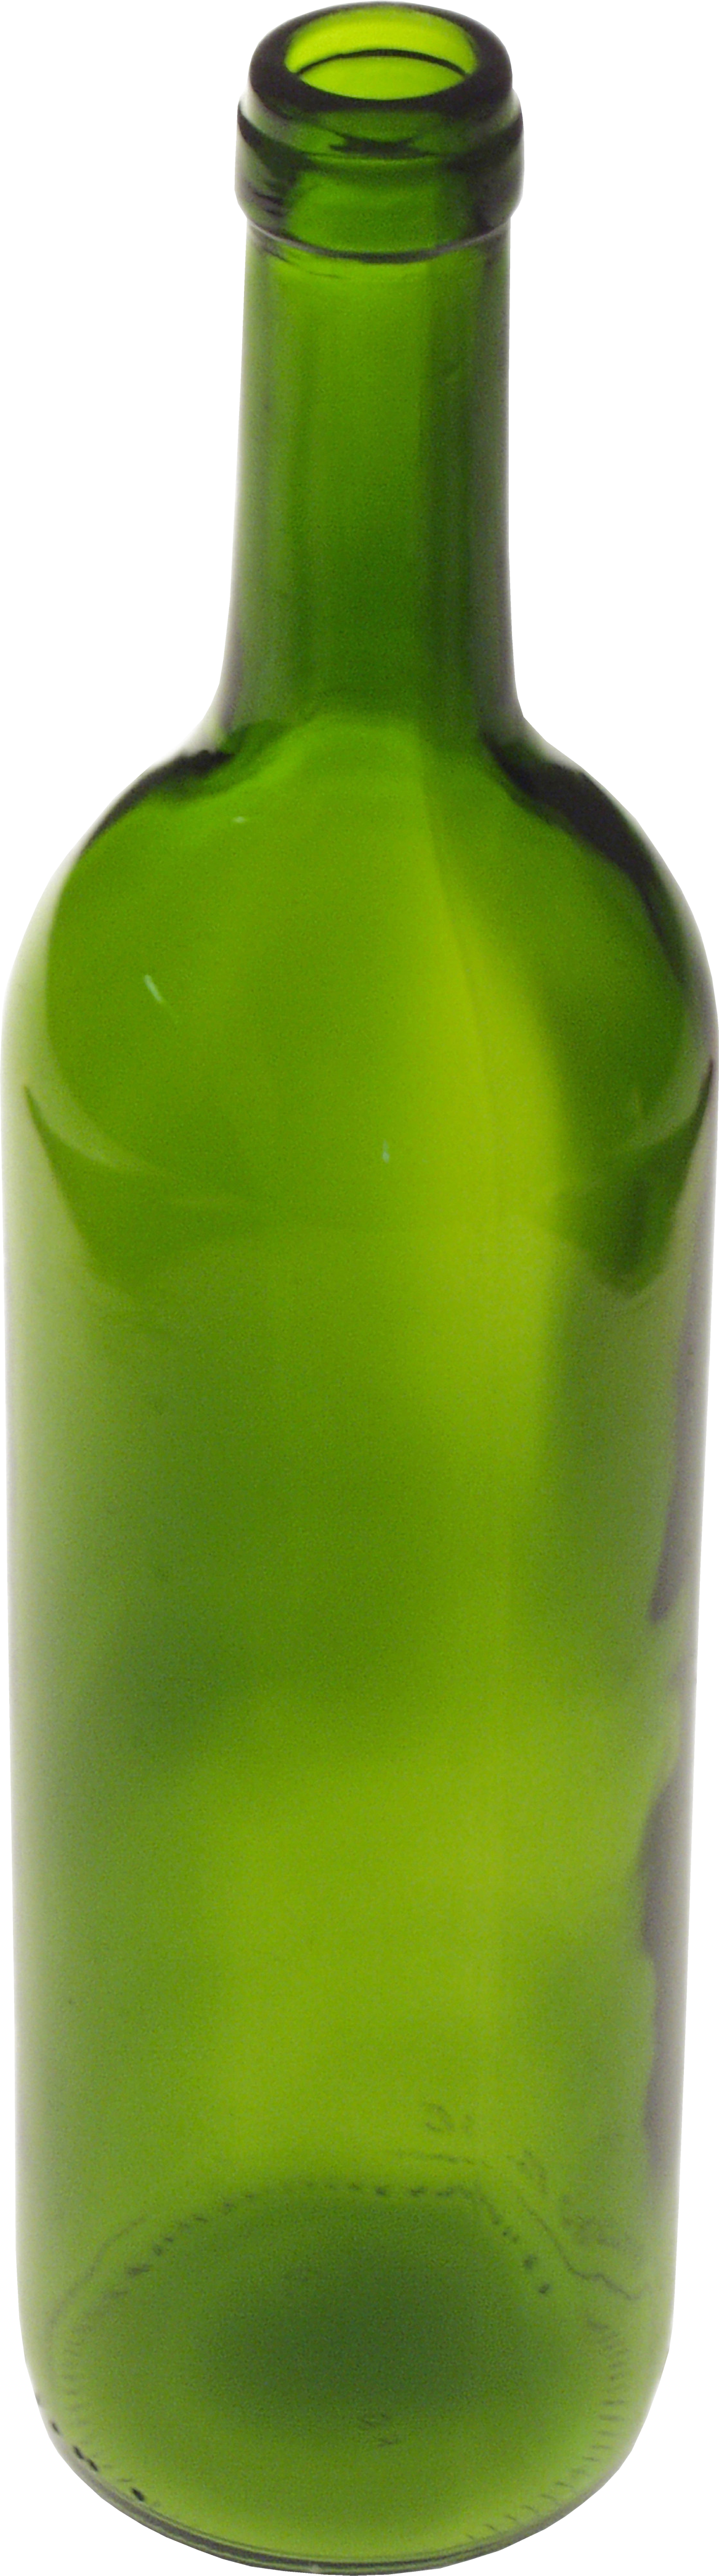 Glass Green Bottle Photos Download Free Image PNG Image